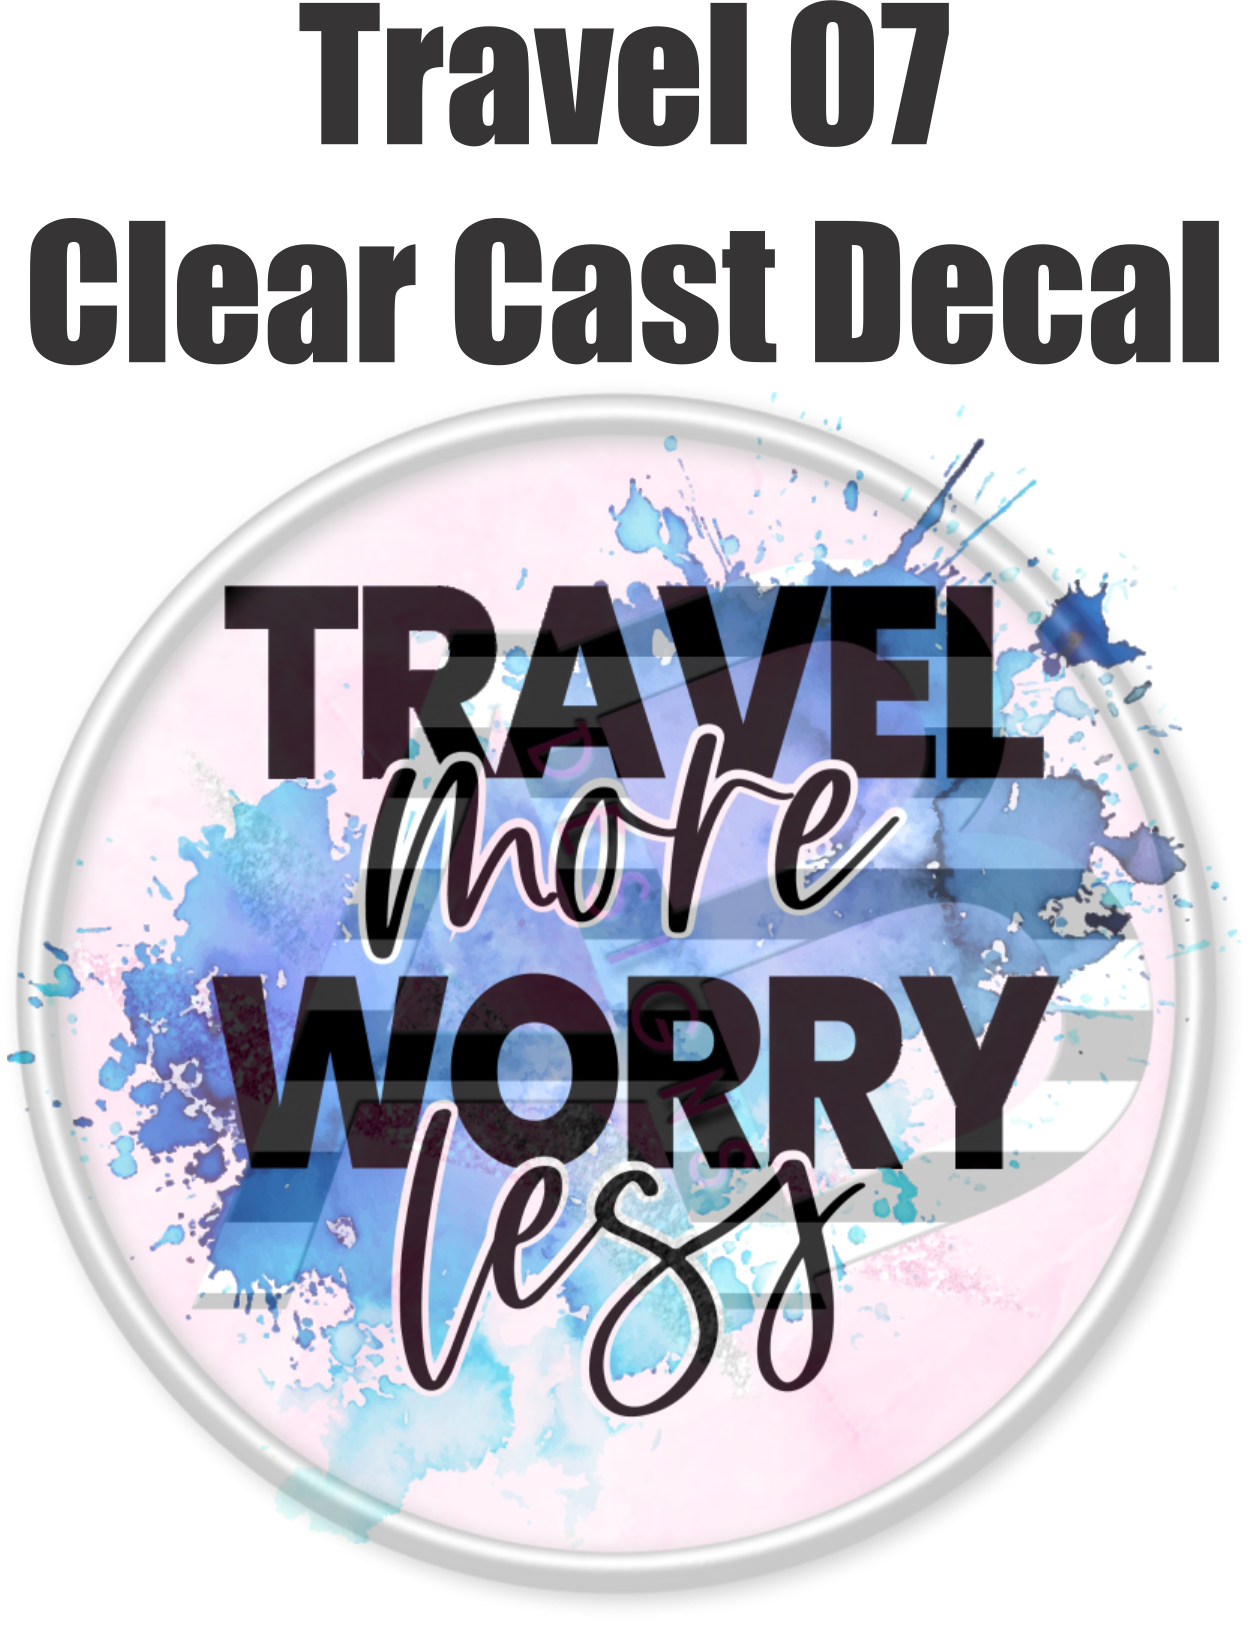 Travel 07 - Clear Cast Decal